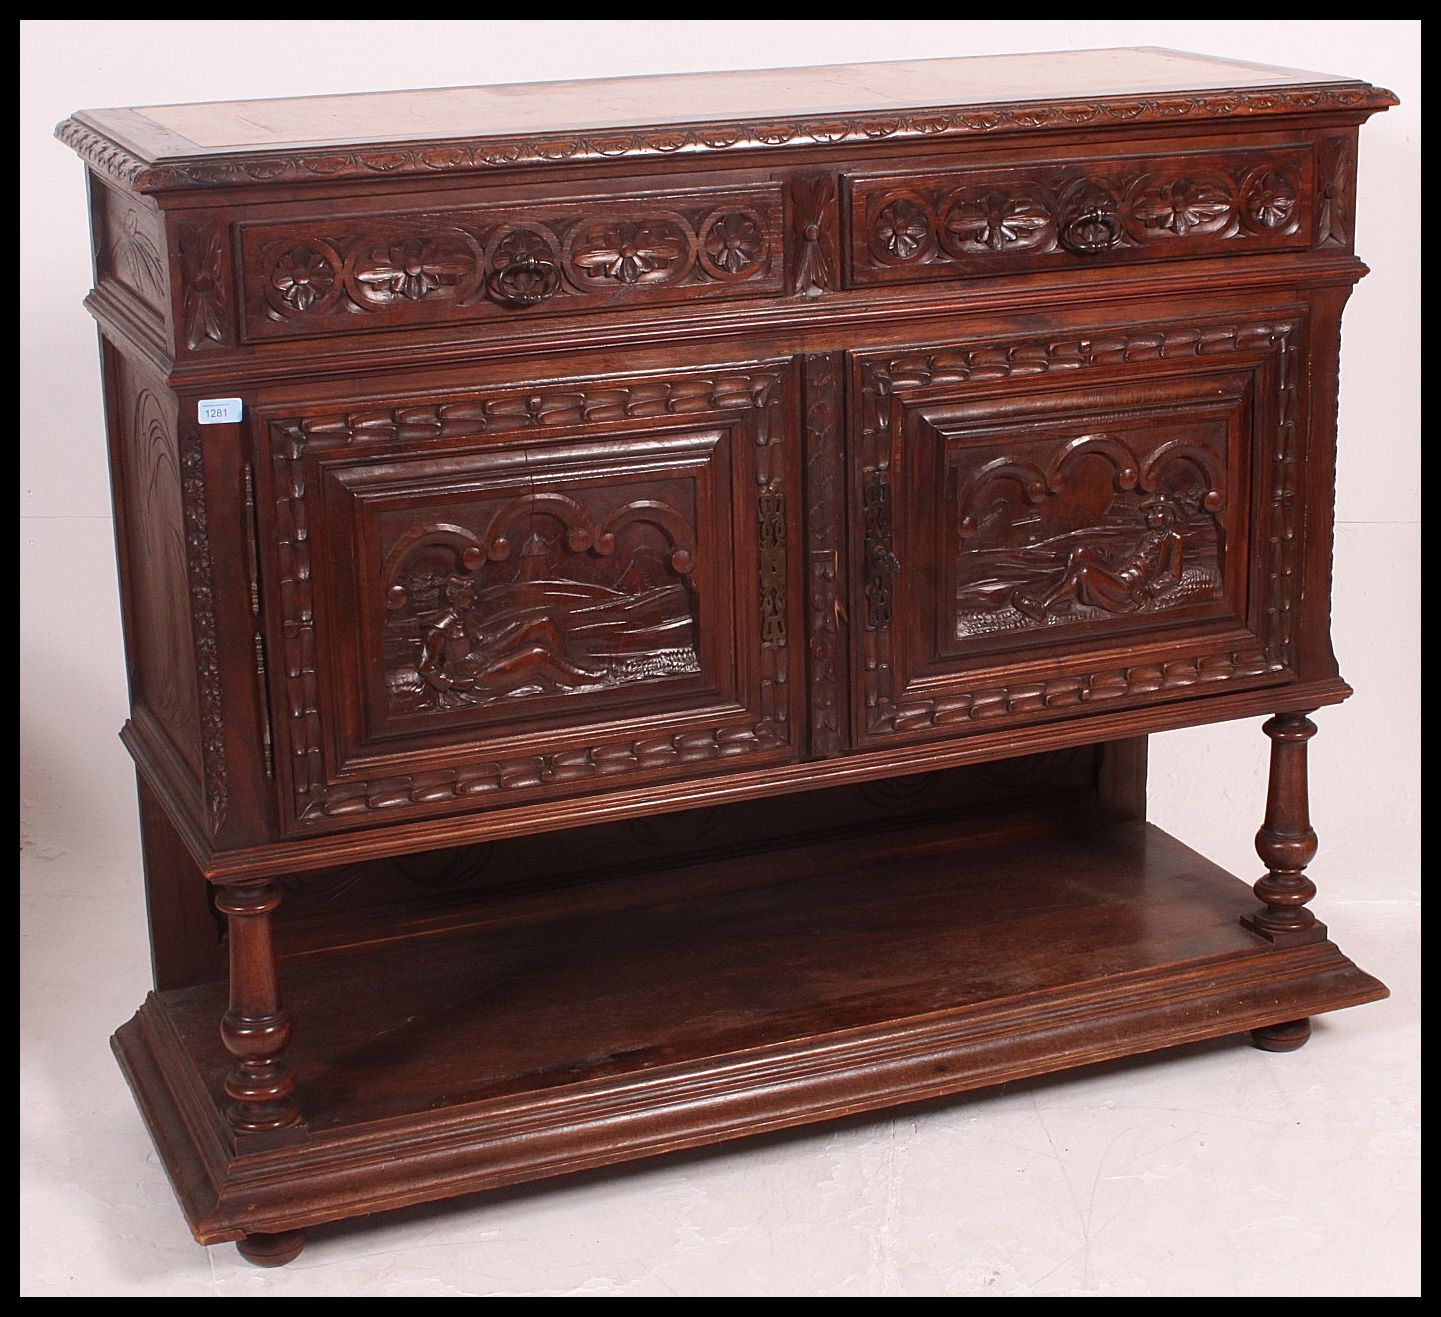 A 19th century Jacobean carved oak green man revival marble top sideboard / buffet. - Image 2 of 6